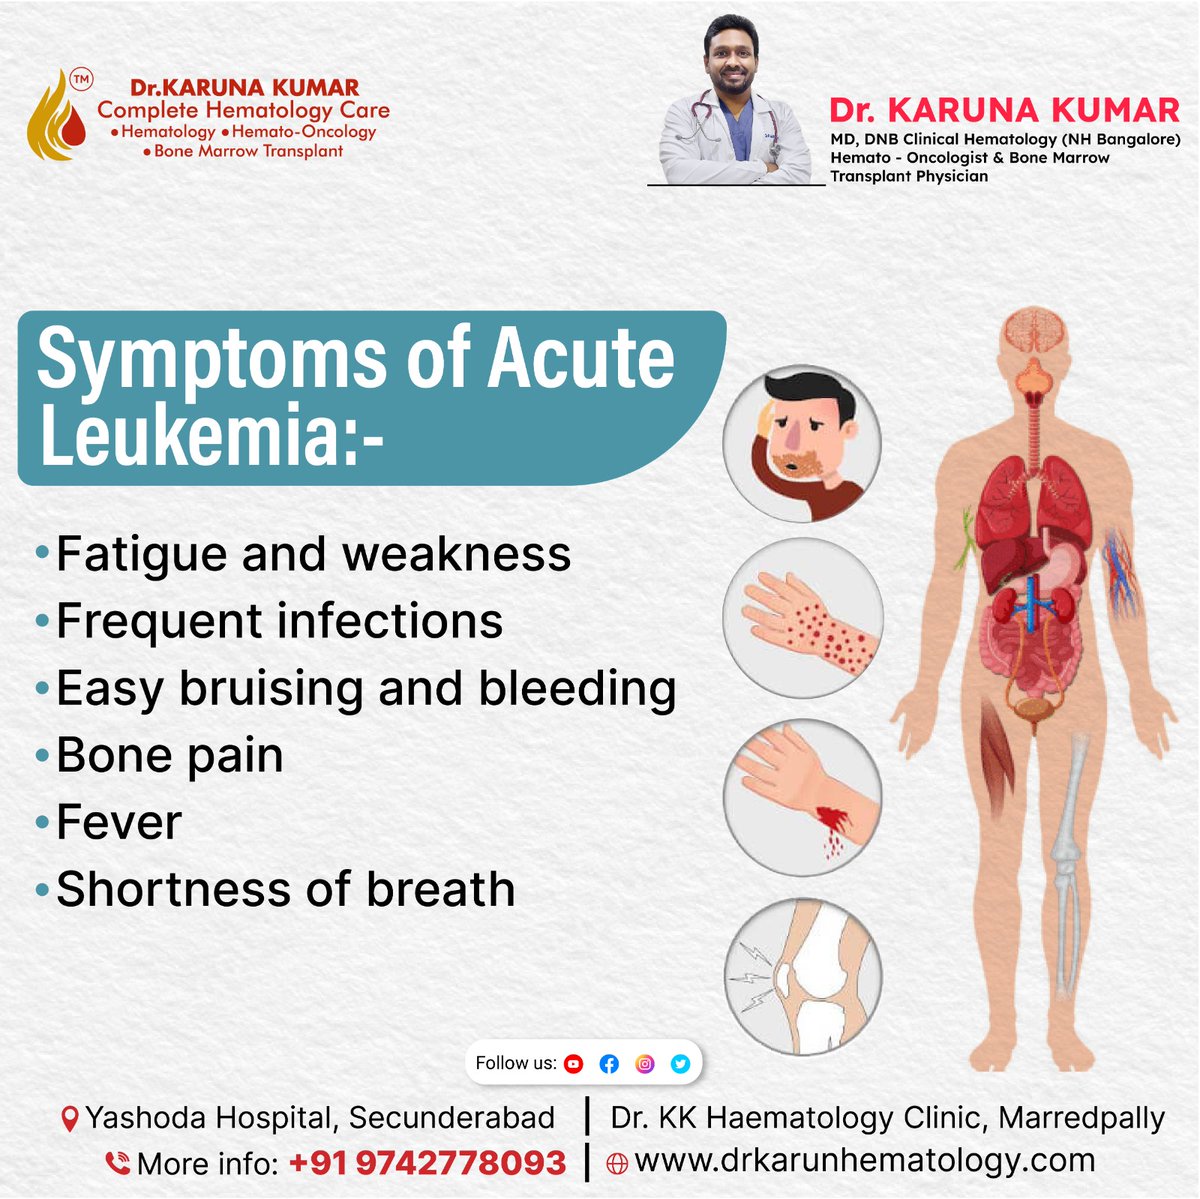 Whispers of acute leukemia: Fatigue's embrace, the dance of infections, and the silent language of bruises. Unveiling the subtle symptoms that speak volumes in the journey.
.
.
#LeukemiaSymptoms #AcuteLeukemiaAwareness #RecognizeTheSigns #ListenToYourBody #CancerSymptomAwareness